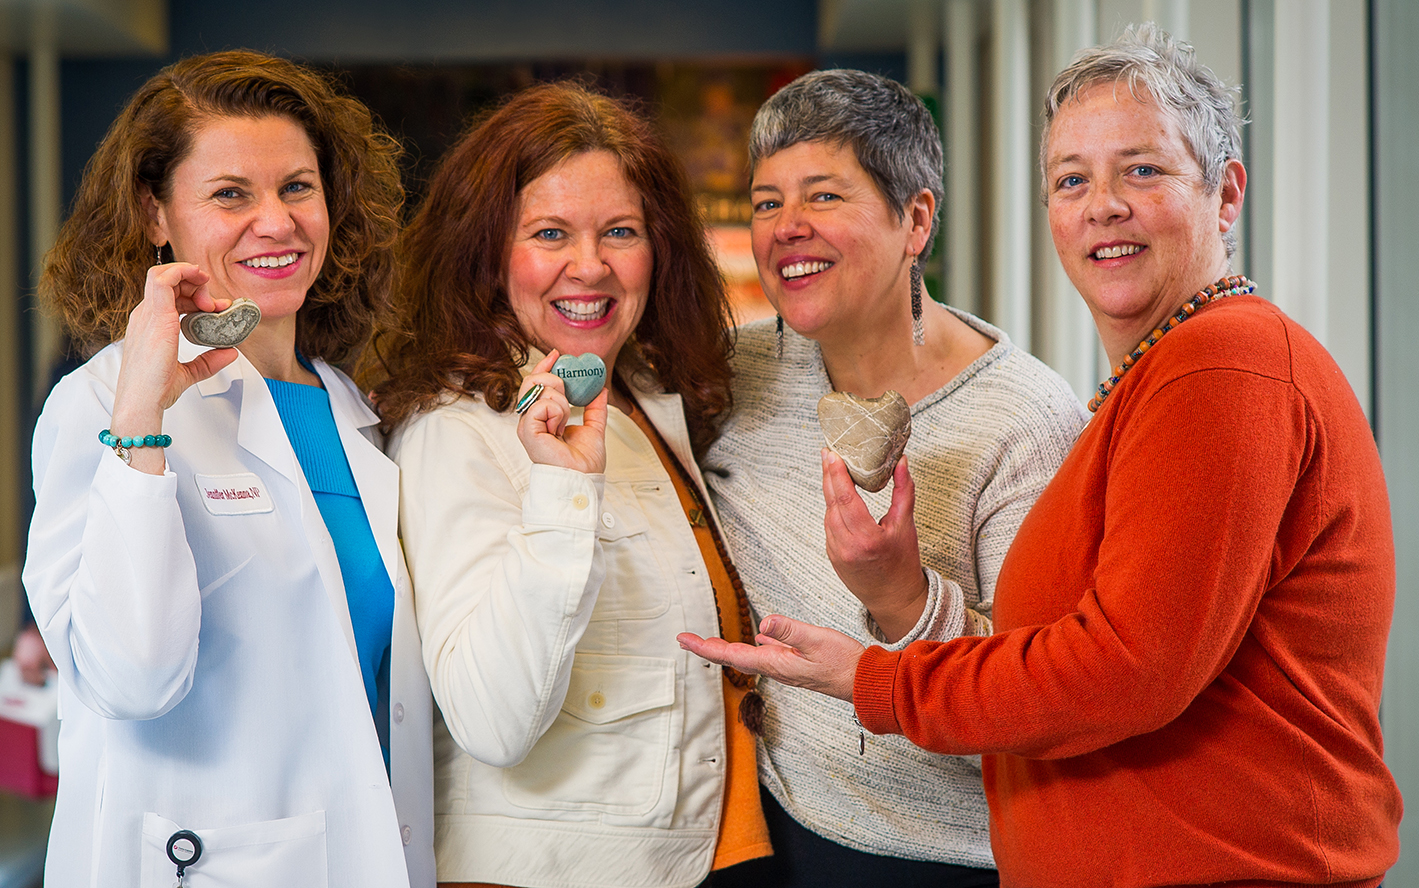 Meg McCormick, far right, with her "rocks:" Her nurse Jennifer McKenna, her sister Maura, and her wife Carla.